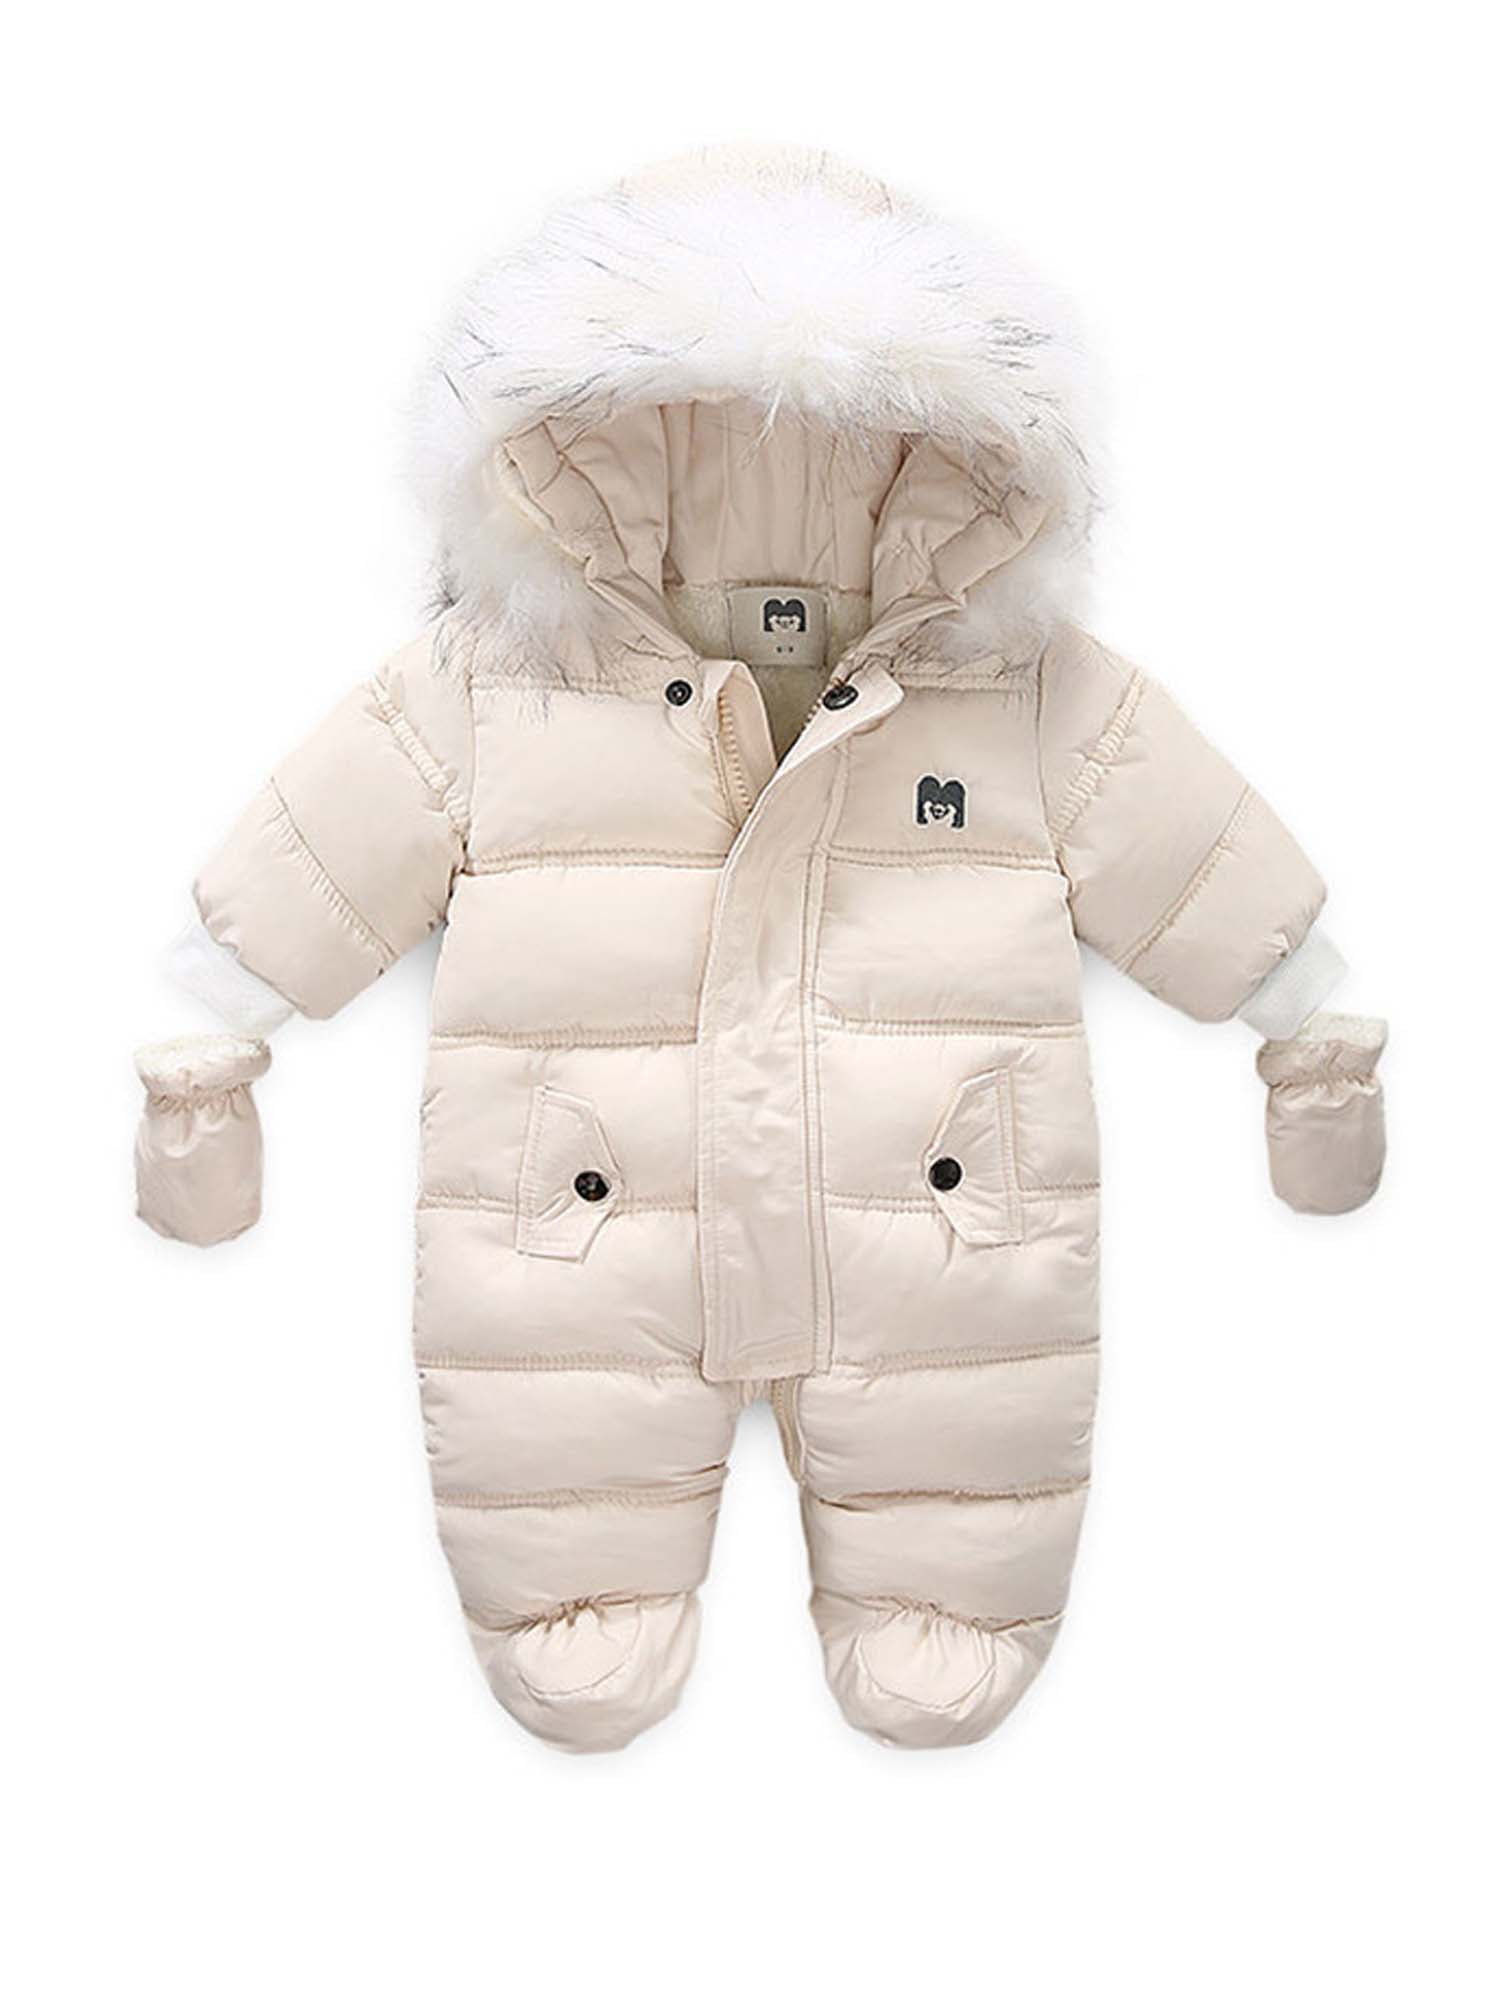 Toddler Infant Baby Boys Girls outerwear Hooded Winter Warm Jacket Down Snowsuit